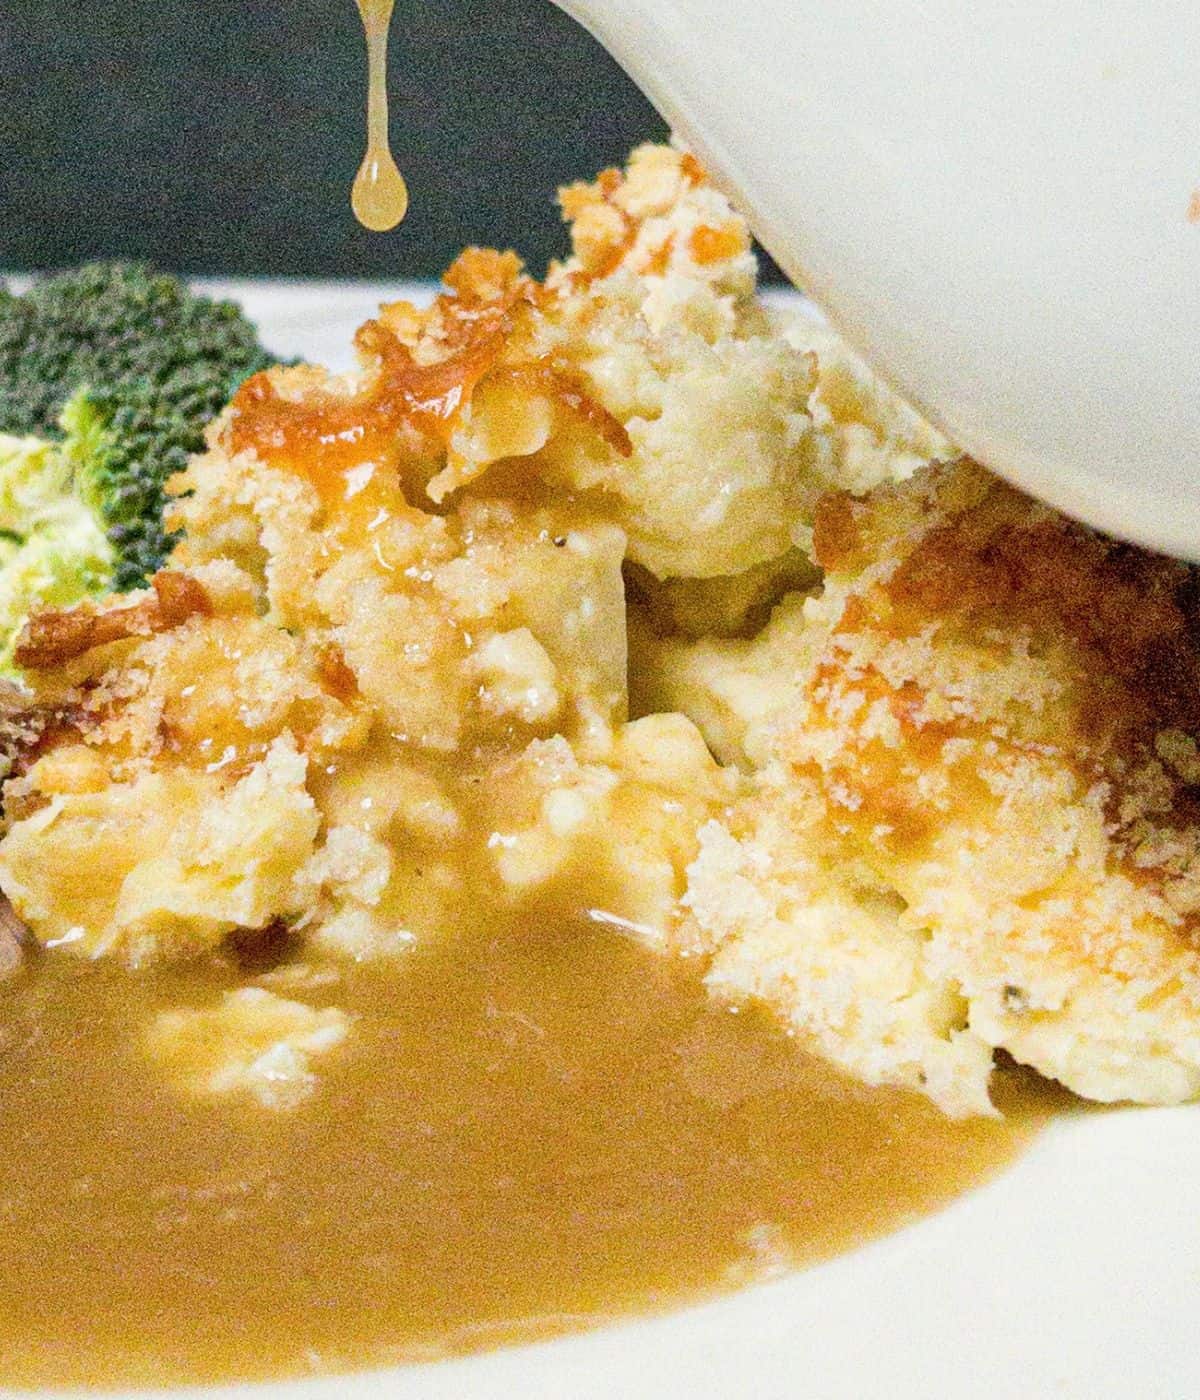 A white plate with cauliflower cheese and broccoli on it. A gravy dish is pouring gravy onto the plate.